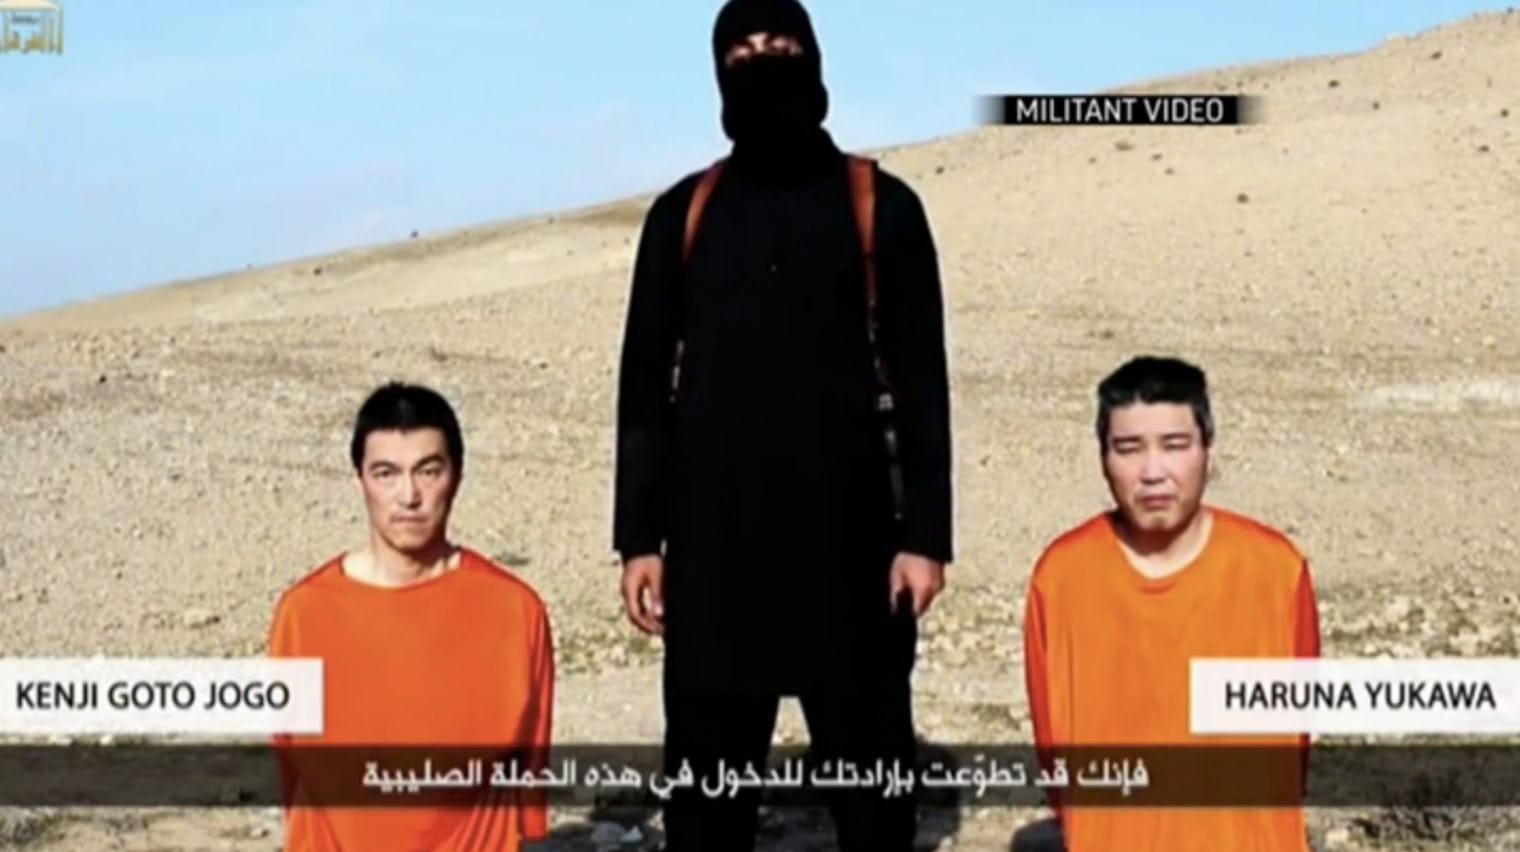 Isis Allegedly Beheads Japanese Hostage Haruna Yukawa In New Video And Images 